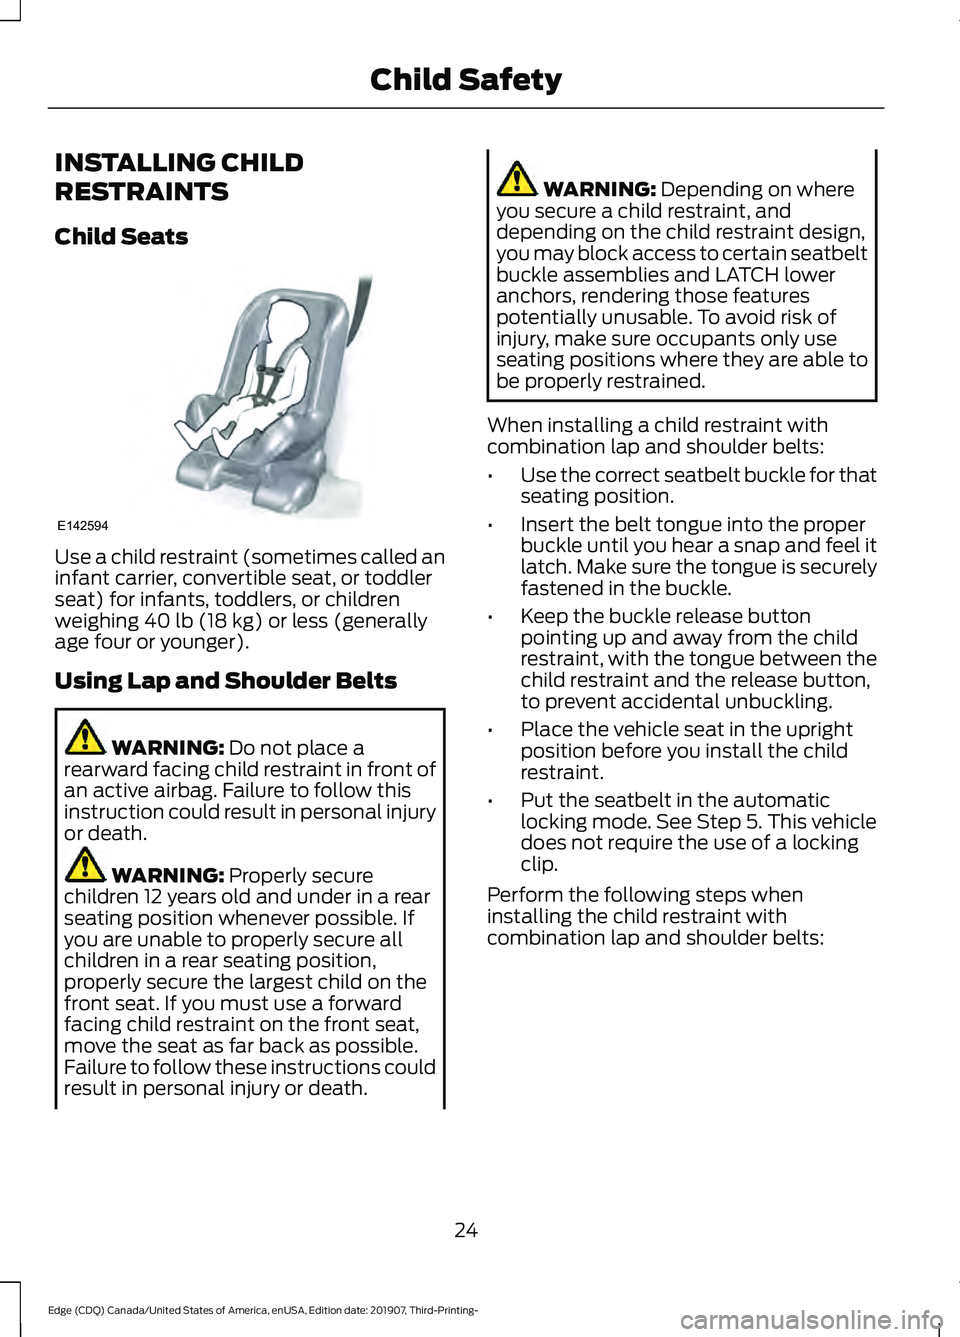 FORD EDGE 2020 Owners Manual INSTALLING CHILD
RESTRAINTS
Child Seats
Use a child restraint (sometimes called an
infant carrier, convertible seat, or toddler
seat) for infants, toddlers, or children
weighing 40 lb (18 kg) or less 